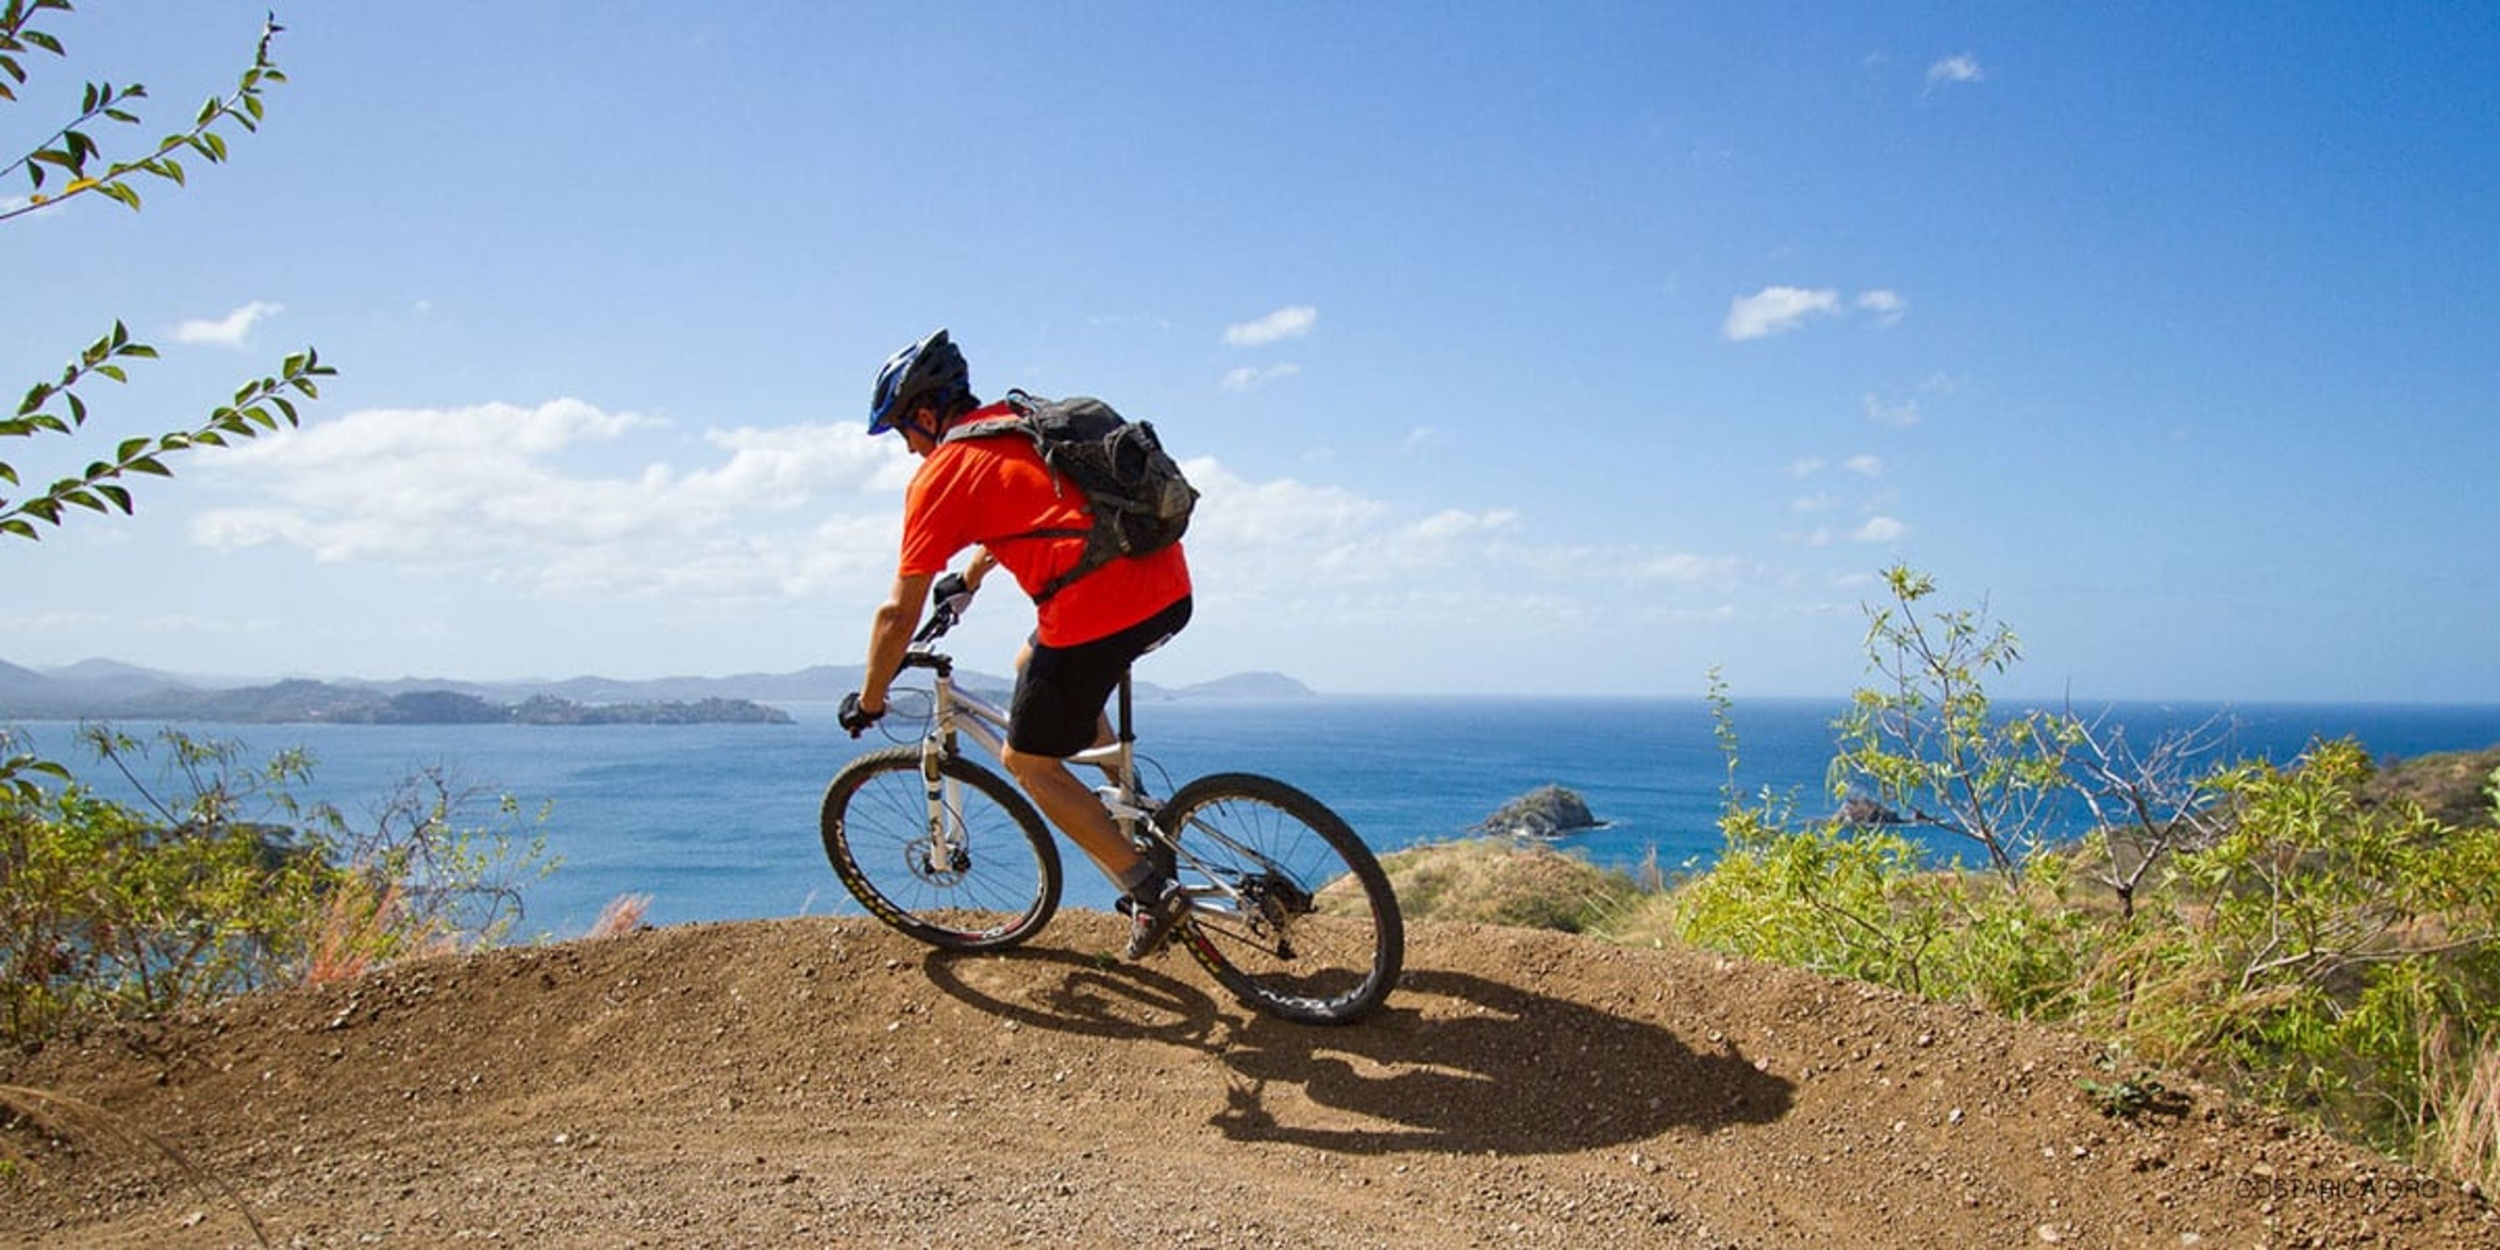 <p>Those staying in a beach town will want to rent a bike. In a country without trains or reliable buses, the only way to get to other beaches is to rent a bike. Plus, it doesn't hurt to get those steps in. </p><p><a href='https://www.msn.com/en-us/community/channel/vid-cj9pqbr0vn9in2b6ddcd8sfgpfq6x6utp44fssrv6mc2gtybw0us'>Follow us on MSN to see more of our exclusive lifestyle content.</a></p>